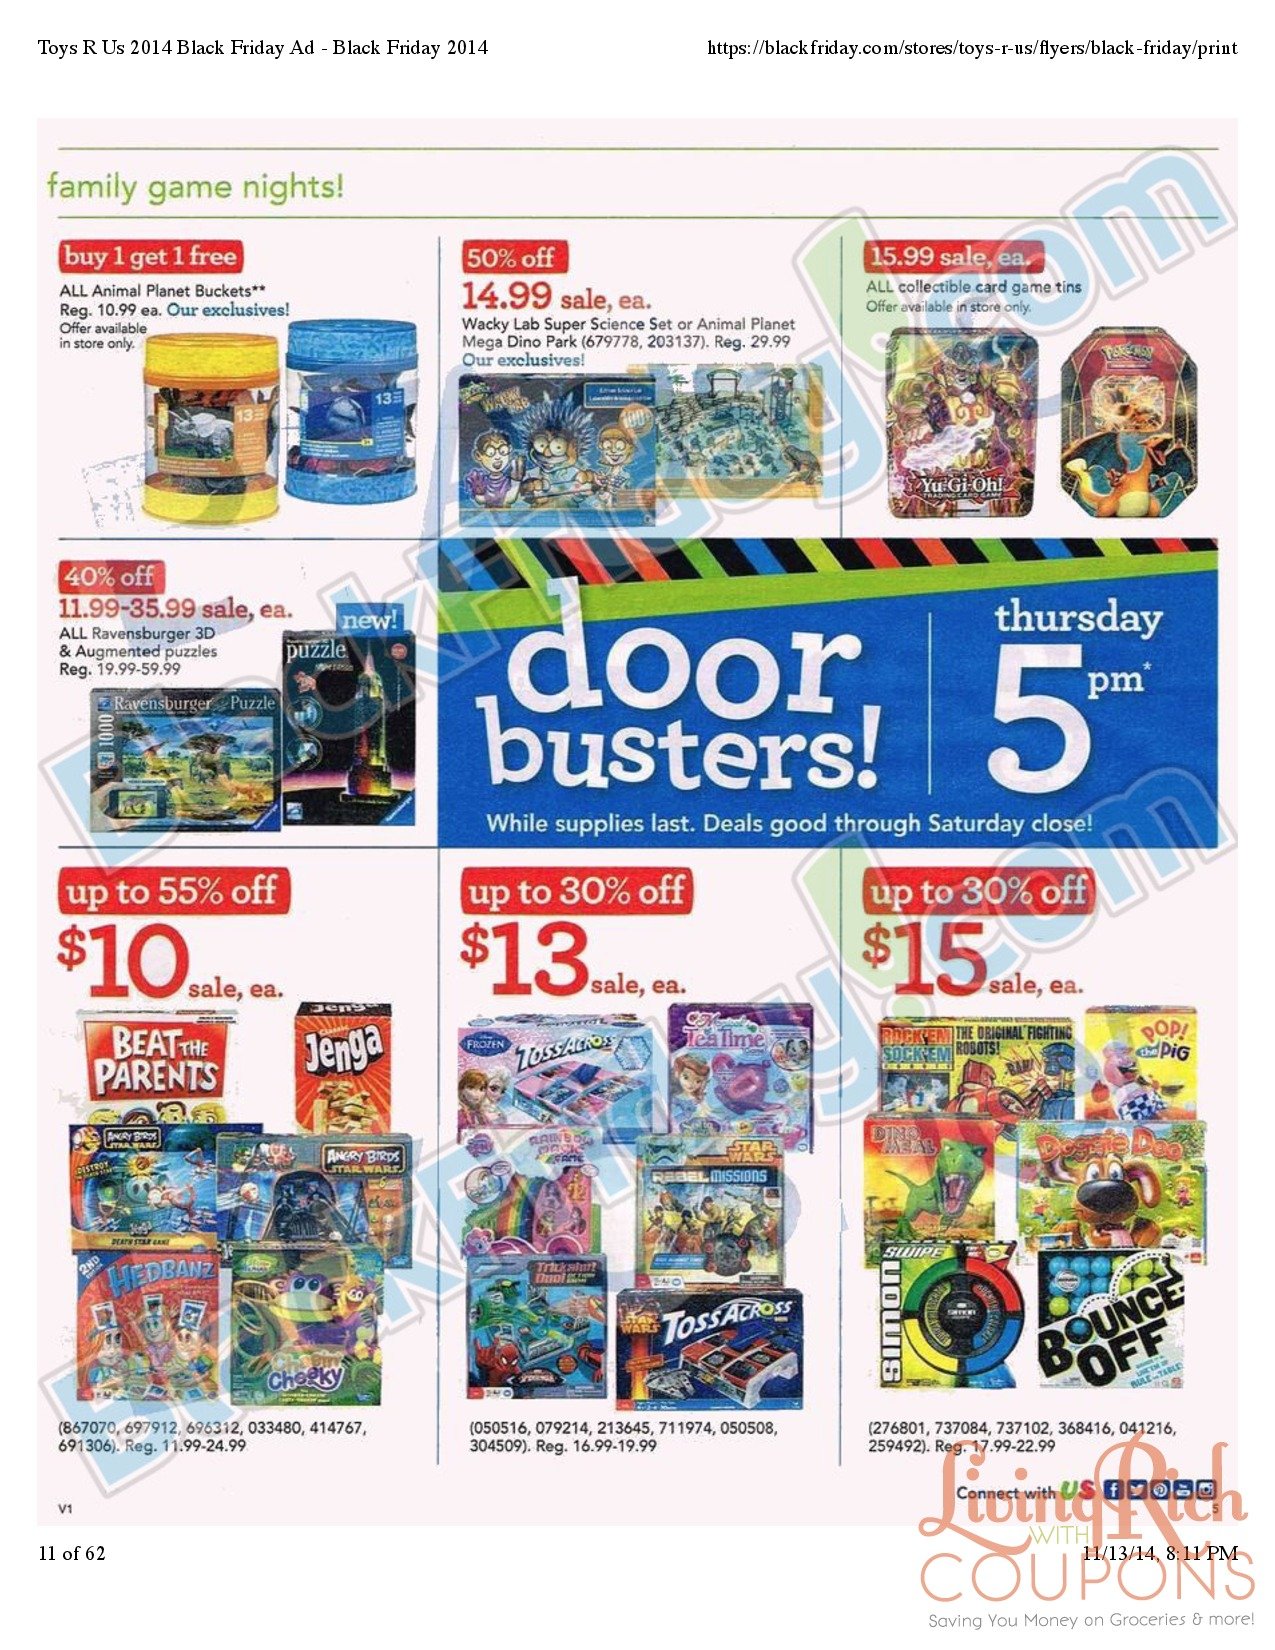 Toys R Us Black Friday Ad 2014, Black Friday Deals, Black Friday HoursLiving Rich With Coupons®